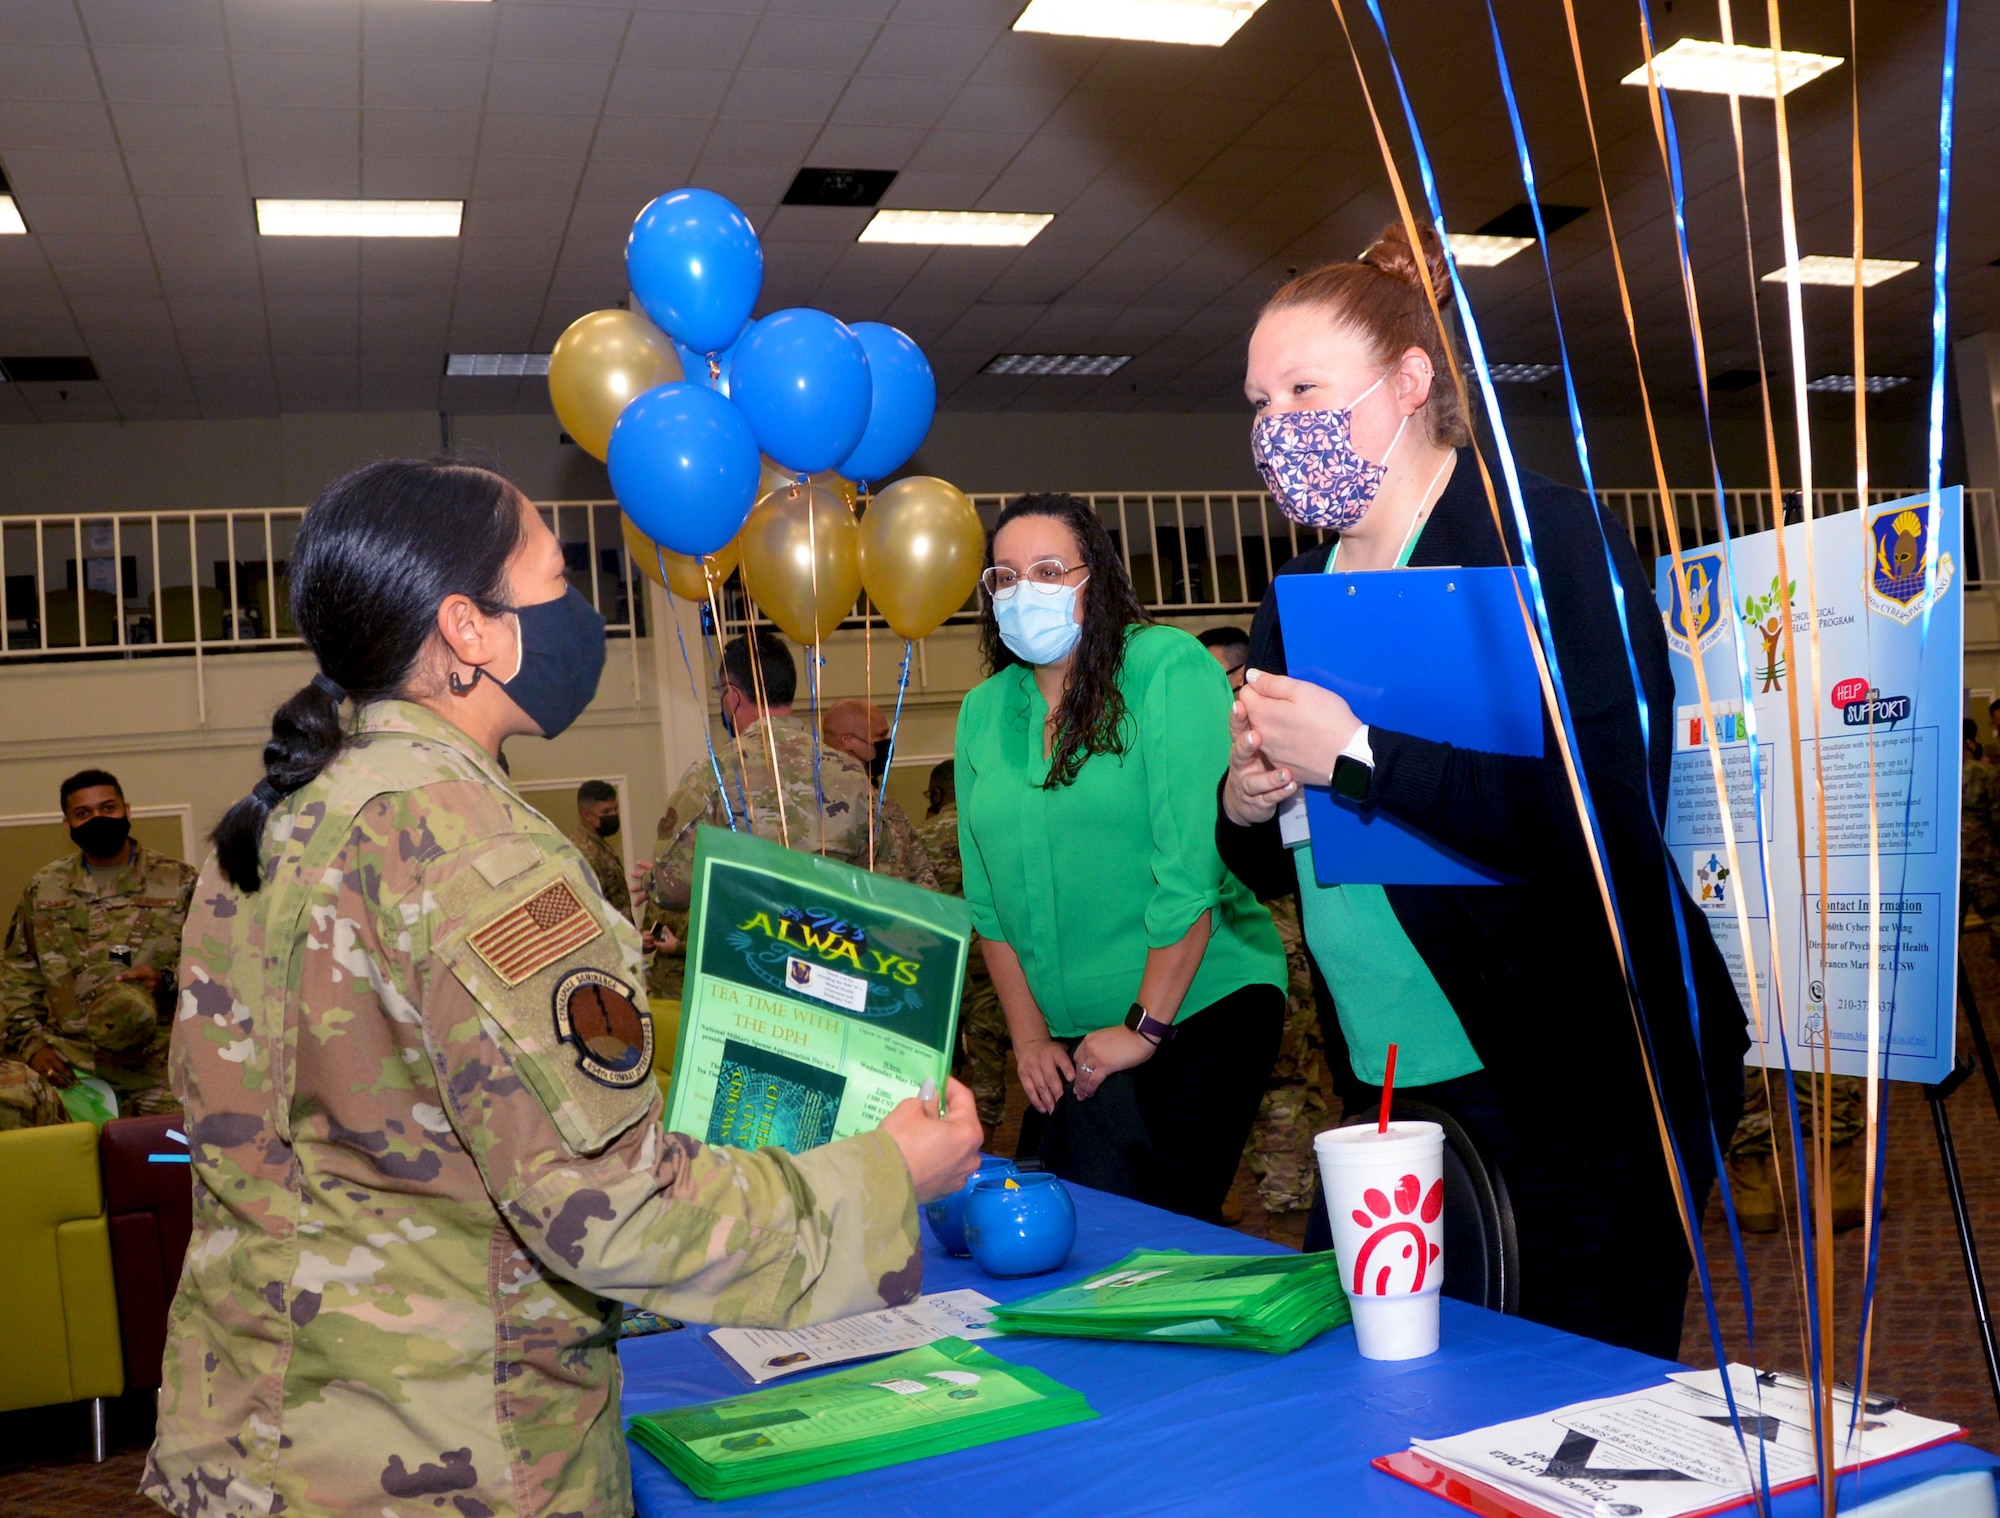 Maj. Joya Gamara, 854th Combat Operations Squadron chief of combat plans division, speaks with Christina Avalos, 960th Cyberspace Wing psychological health volunteer, and Christyn Mundy, 960th CW psychological health intern, during the Mental Health and Resiliency Fair, May 1, 2021, at Joint Base San Antonio-Lackland, Texas. (U.S. Air Force photo by Tech. Sgt. Samantha Mathison)